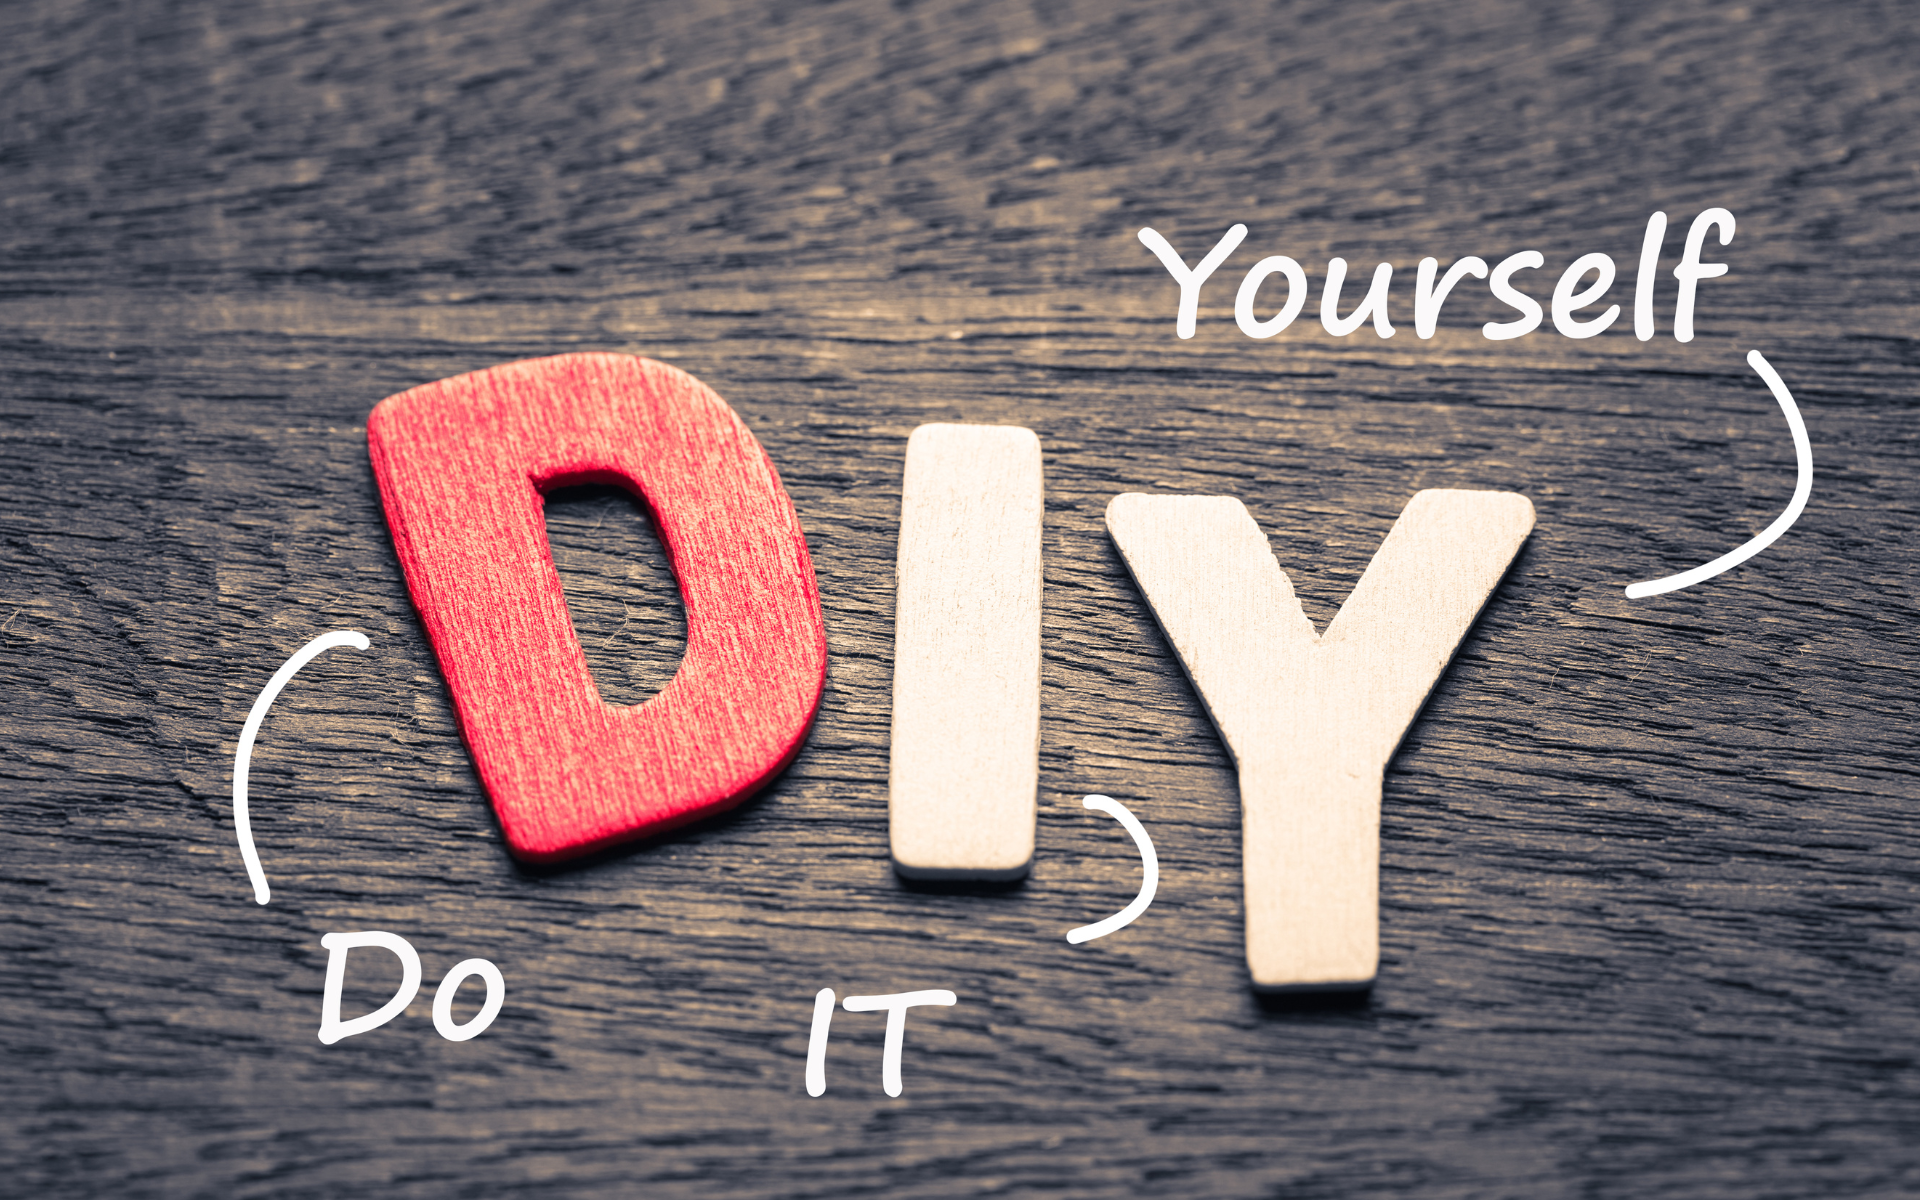 DFY, DWY, or DIY Marketing: Which Path Leads to Conversion Paradise?